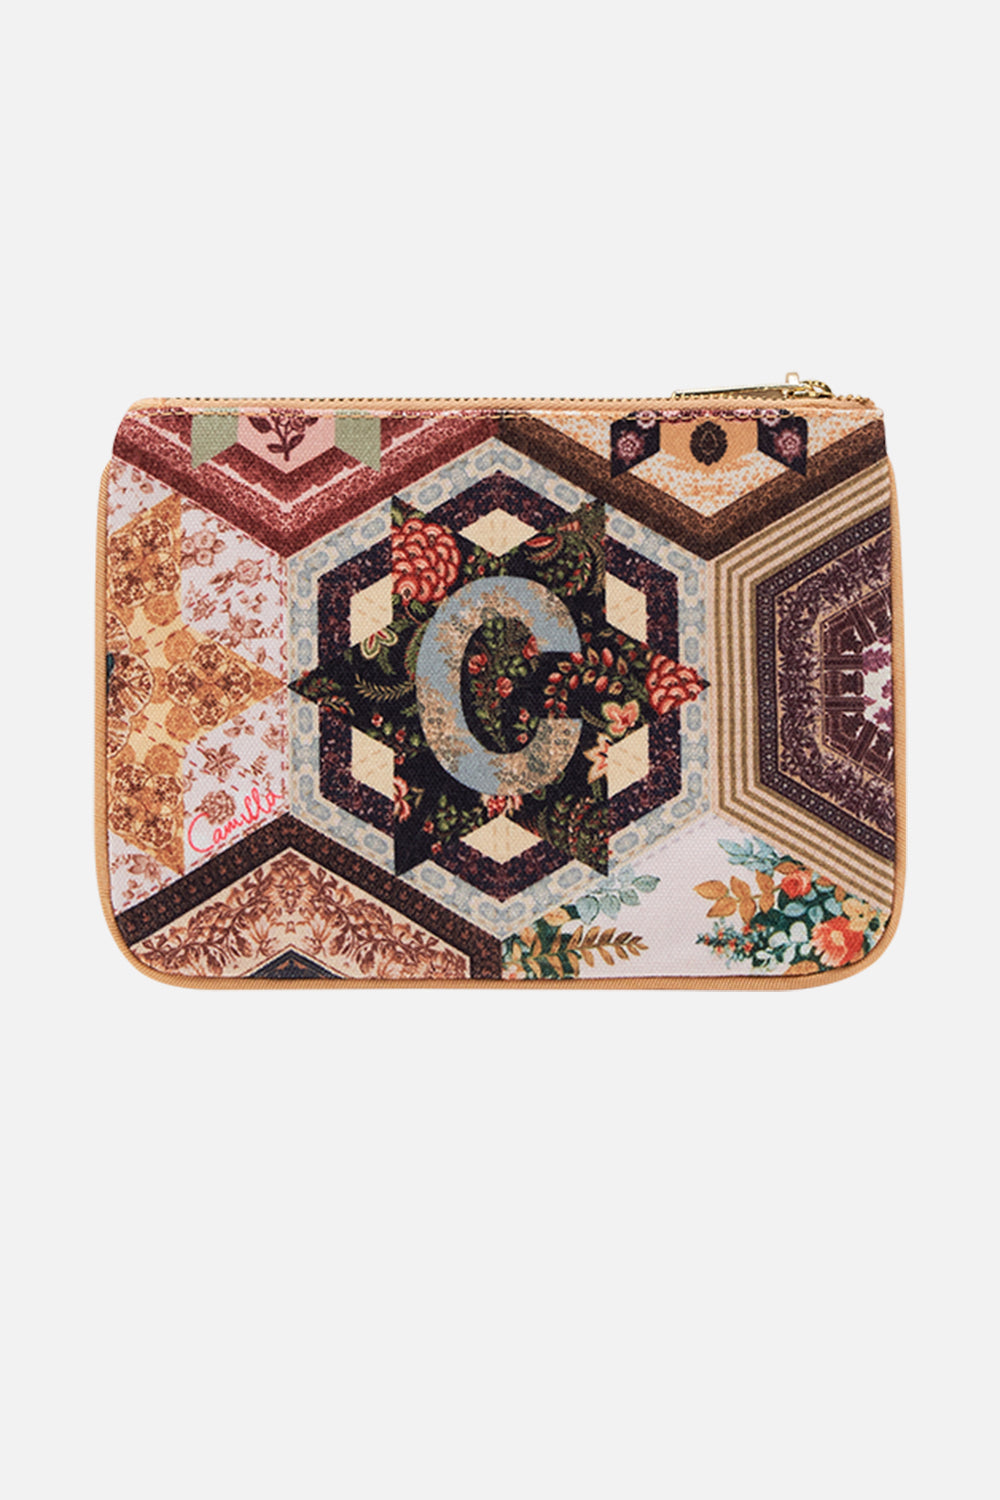 CAMILLA floral coin and phone purse in Stitched in Time